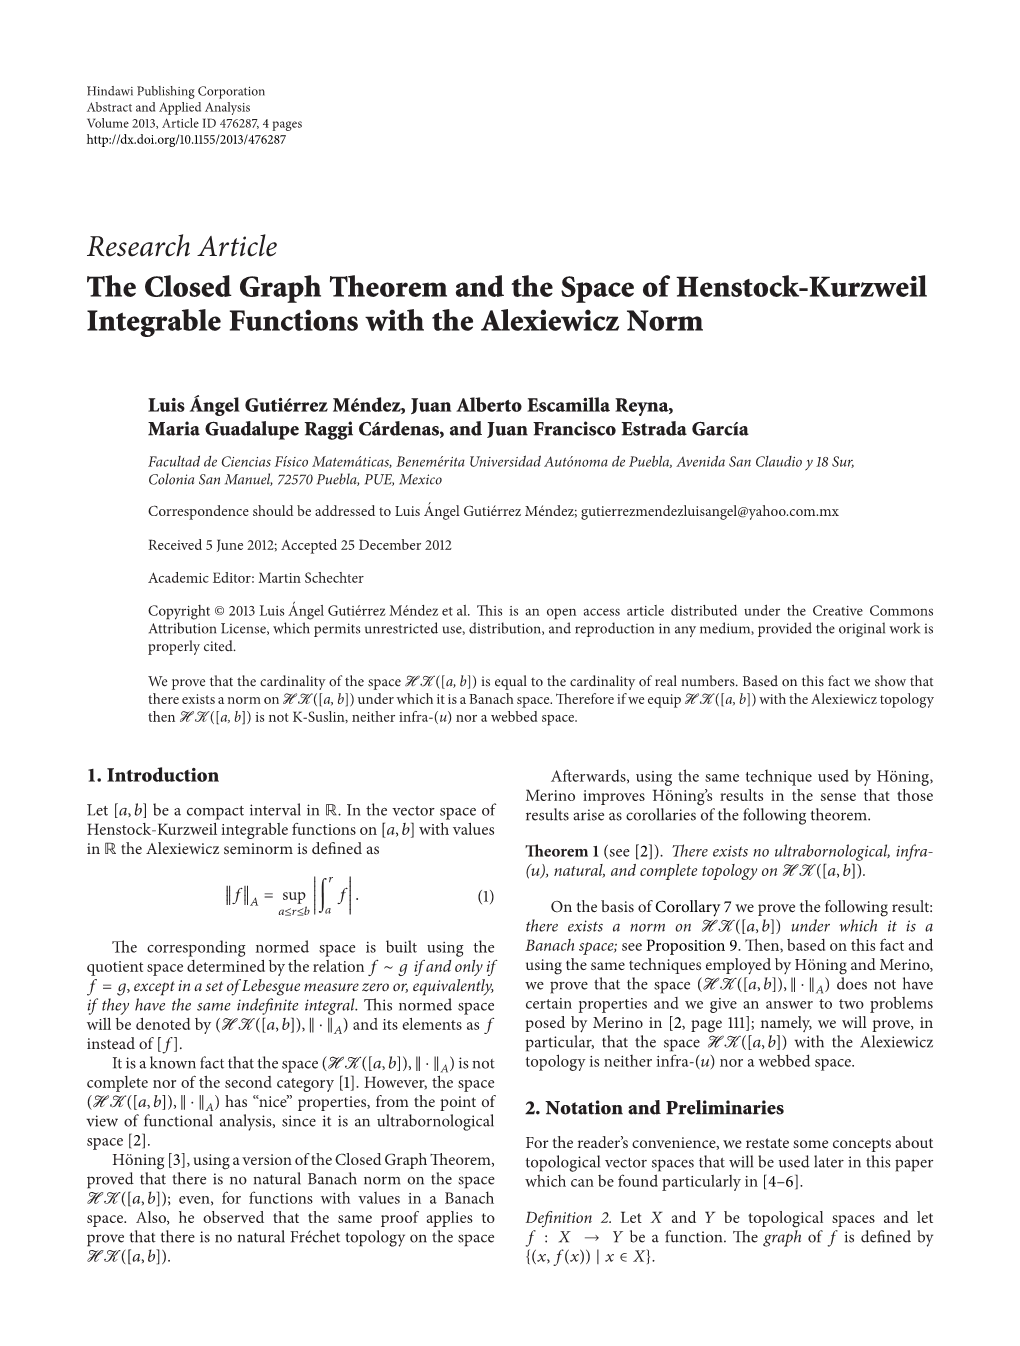 The Closed Graph Theorem and the Space of Henstock-Kurzweil Integrable Functions with the Alexiewicz Norm